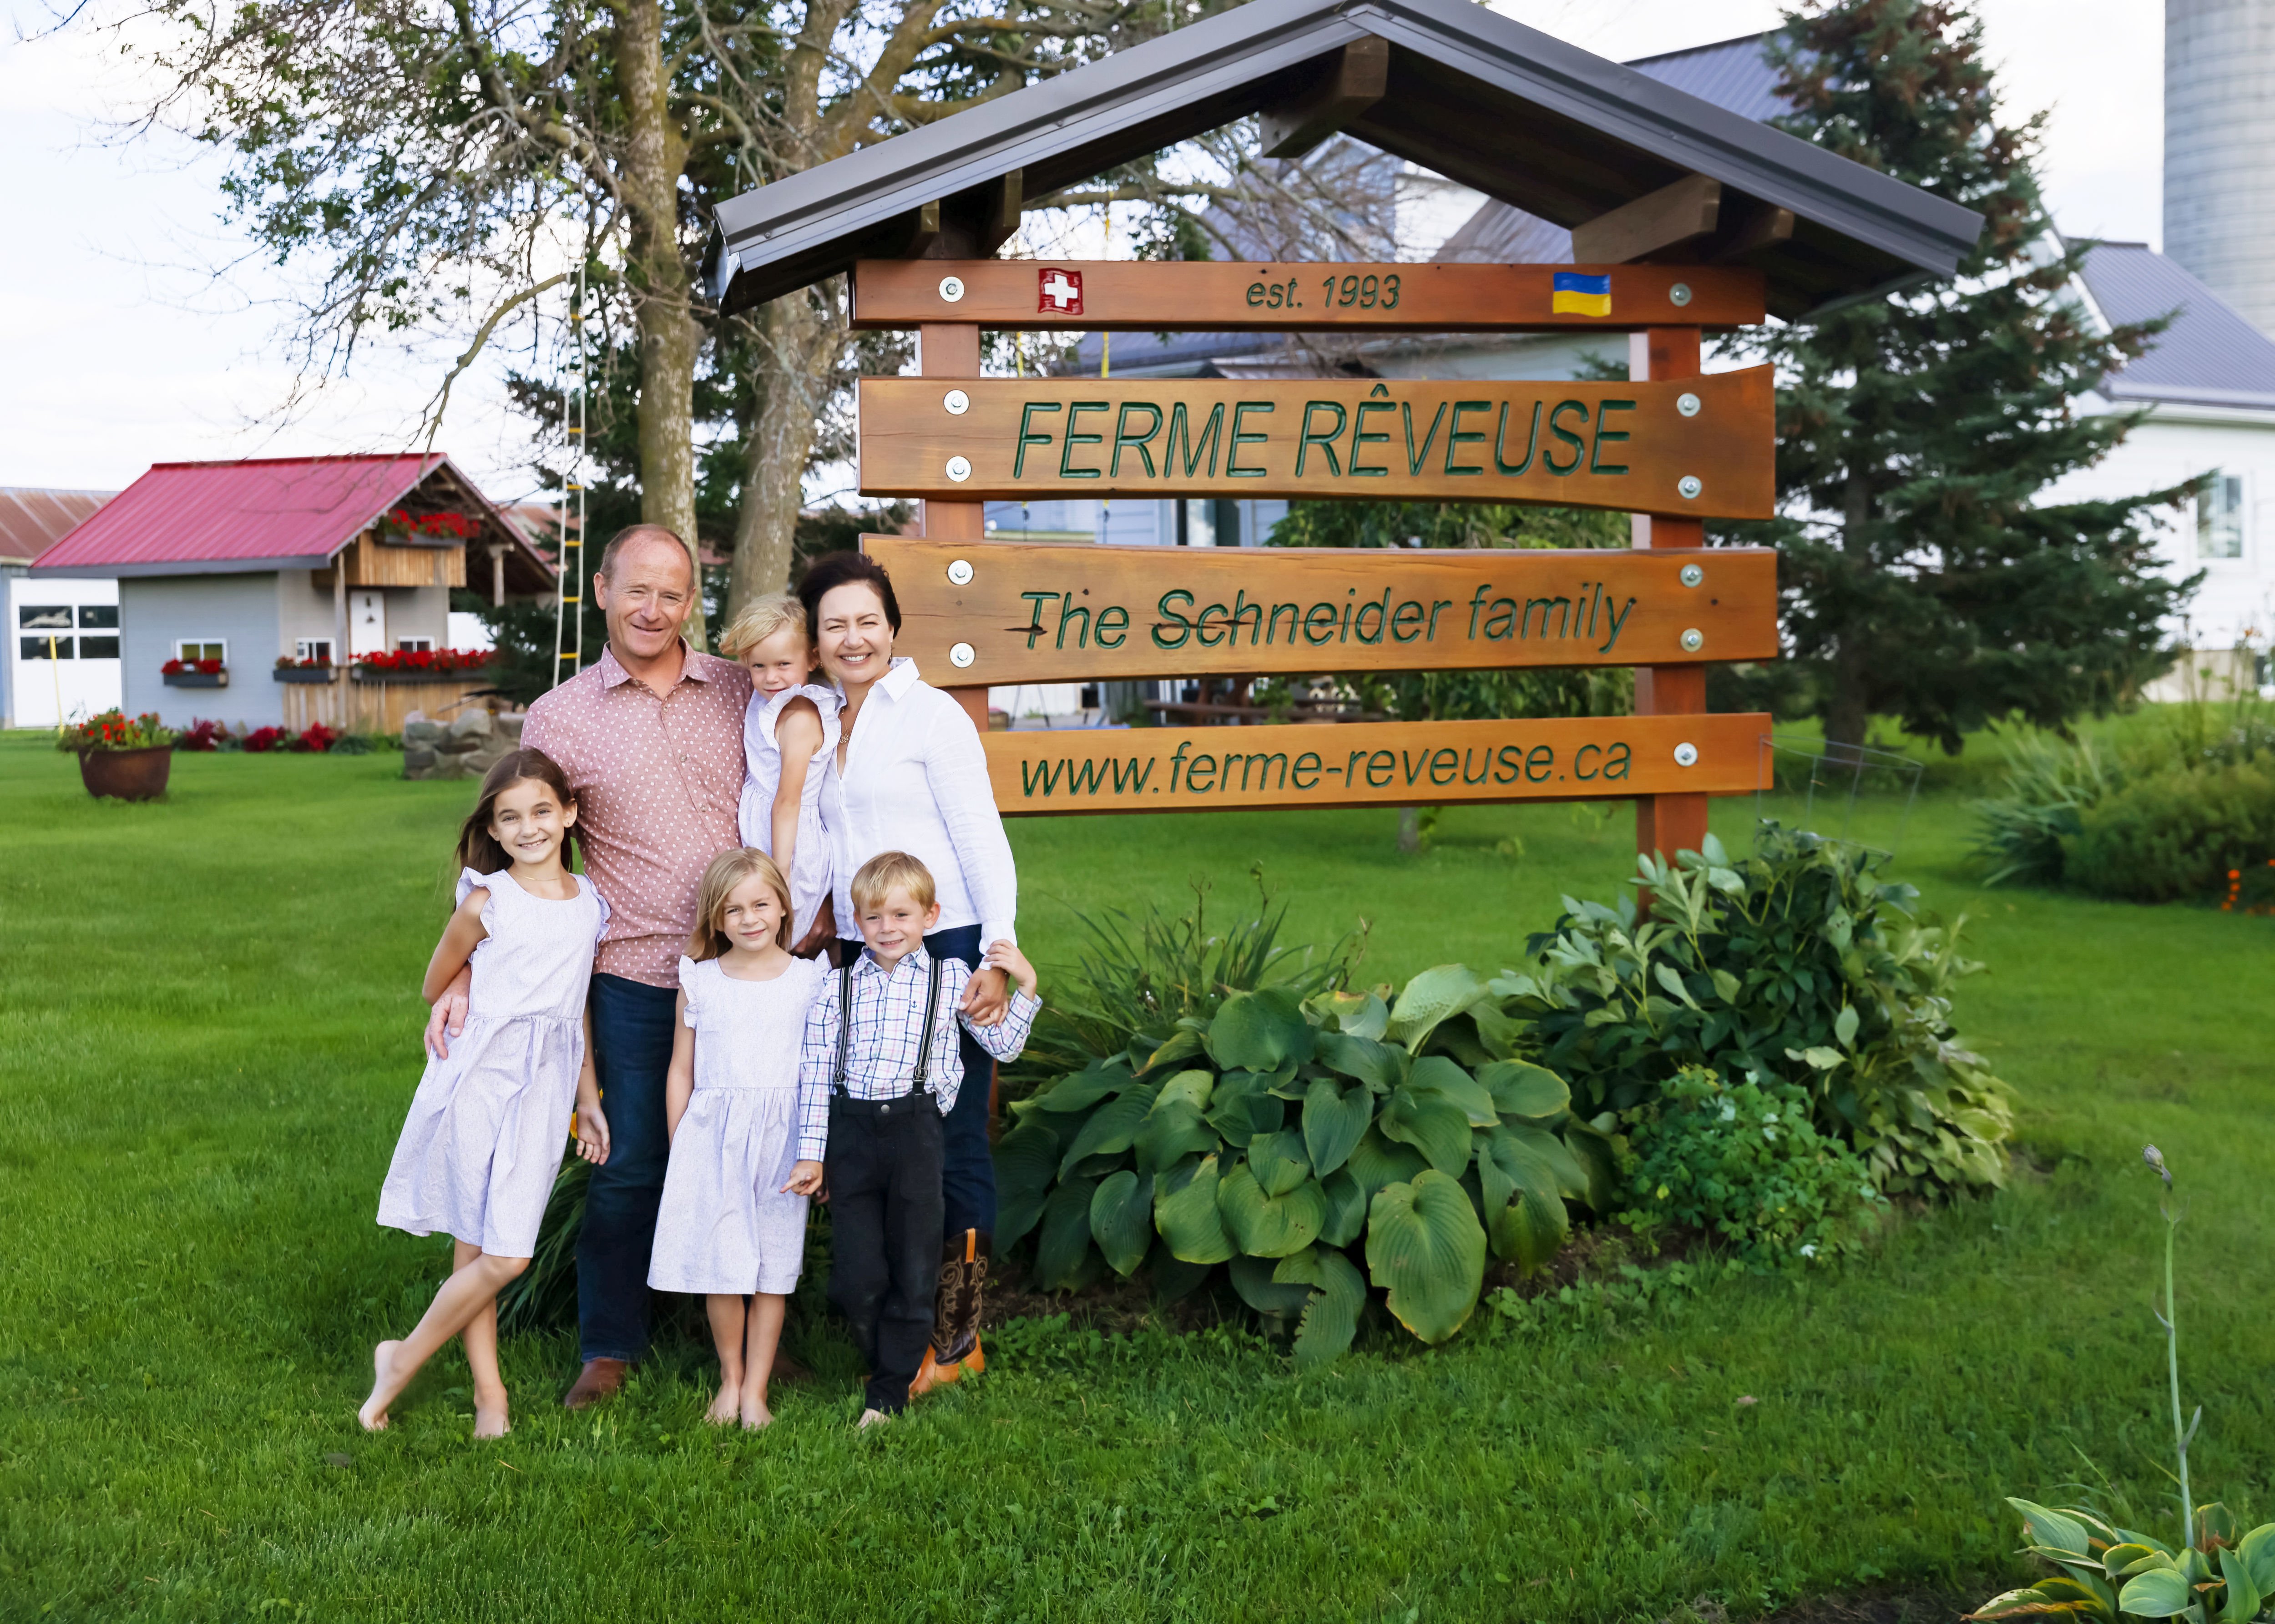 Owners Kornel and Olga Schneider and their four children in front of a wooden sign with the name of their farm, their website, their history and their origins.